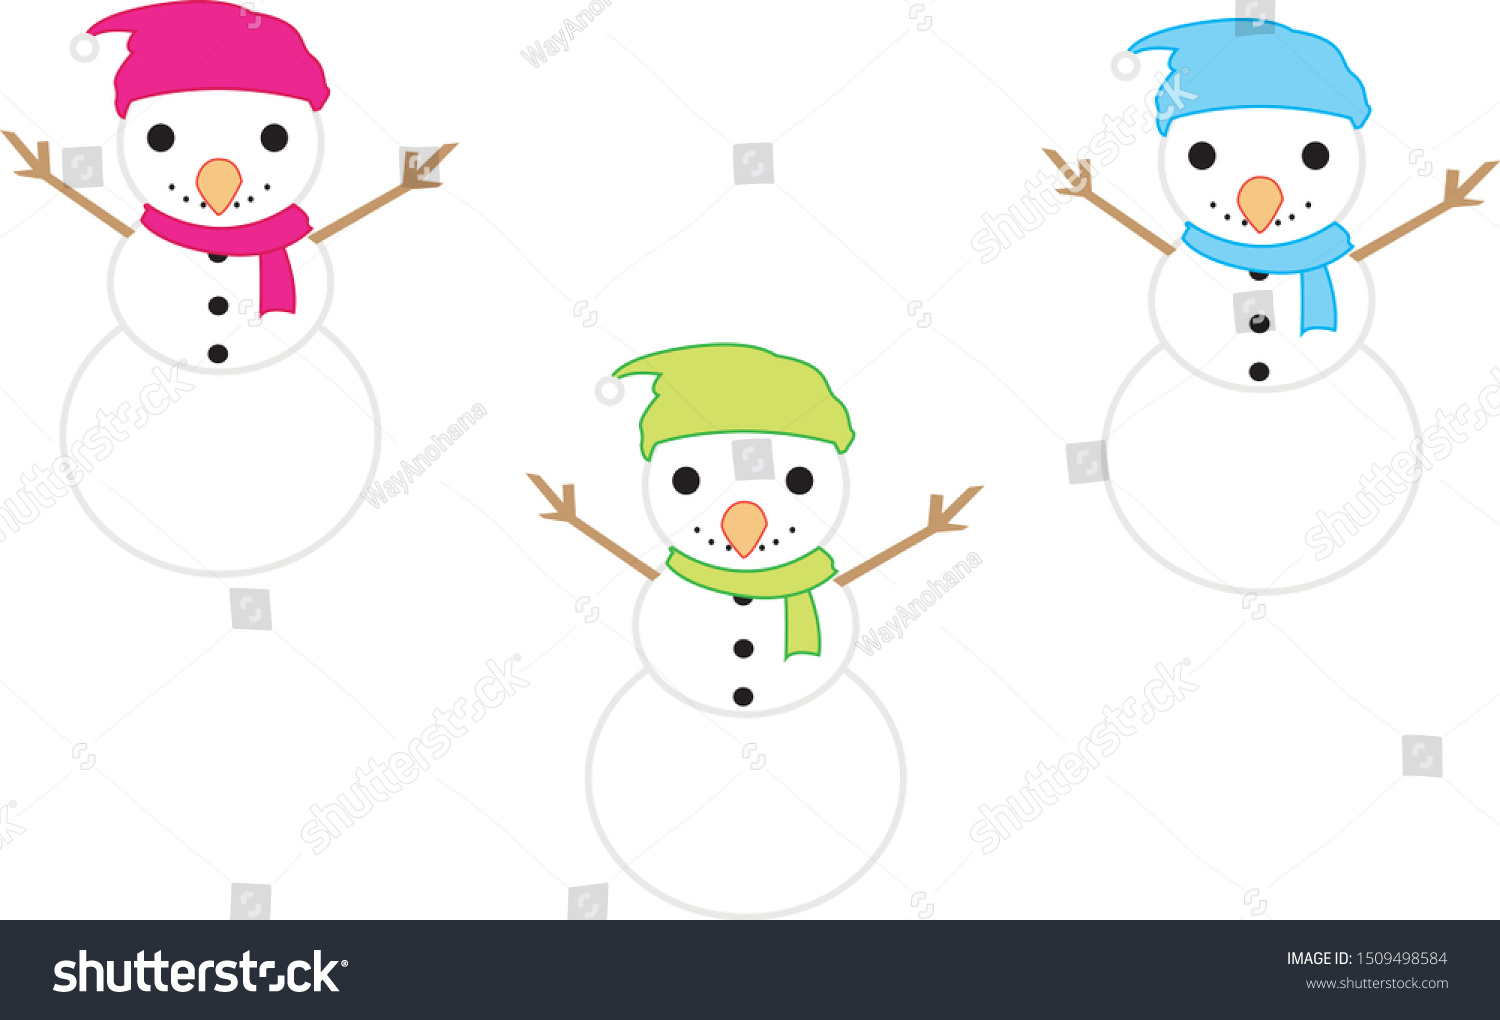 Three 2d Snowman Vector Pictures Eps Stock Vector (Royalty Free) 1509498584  | Shutterstock